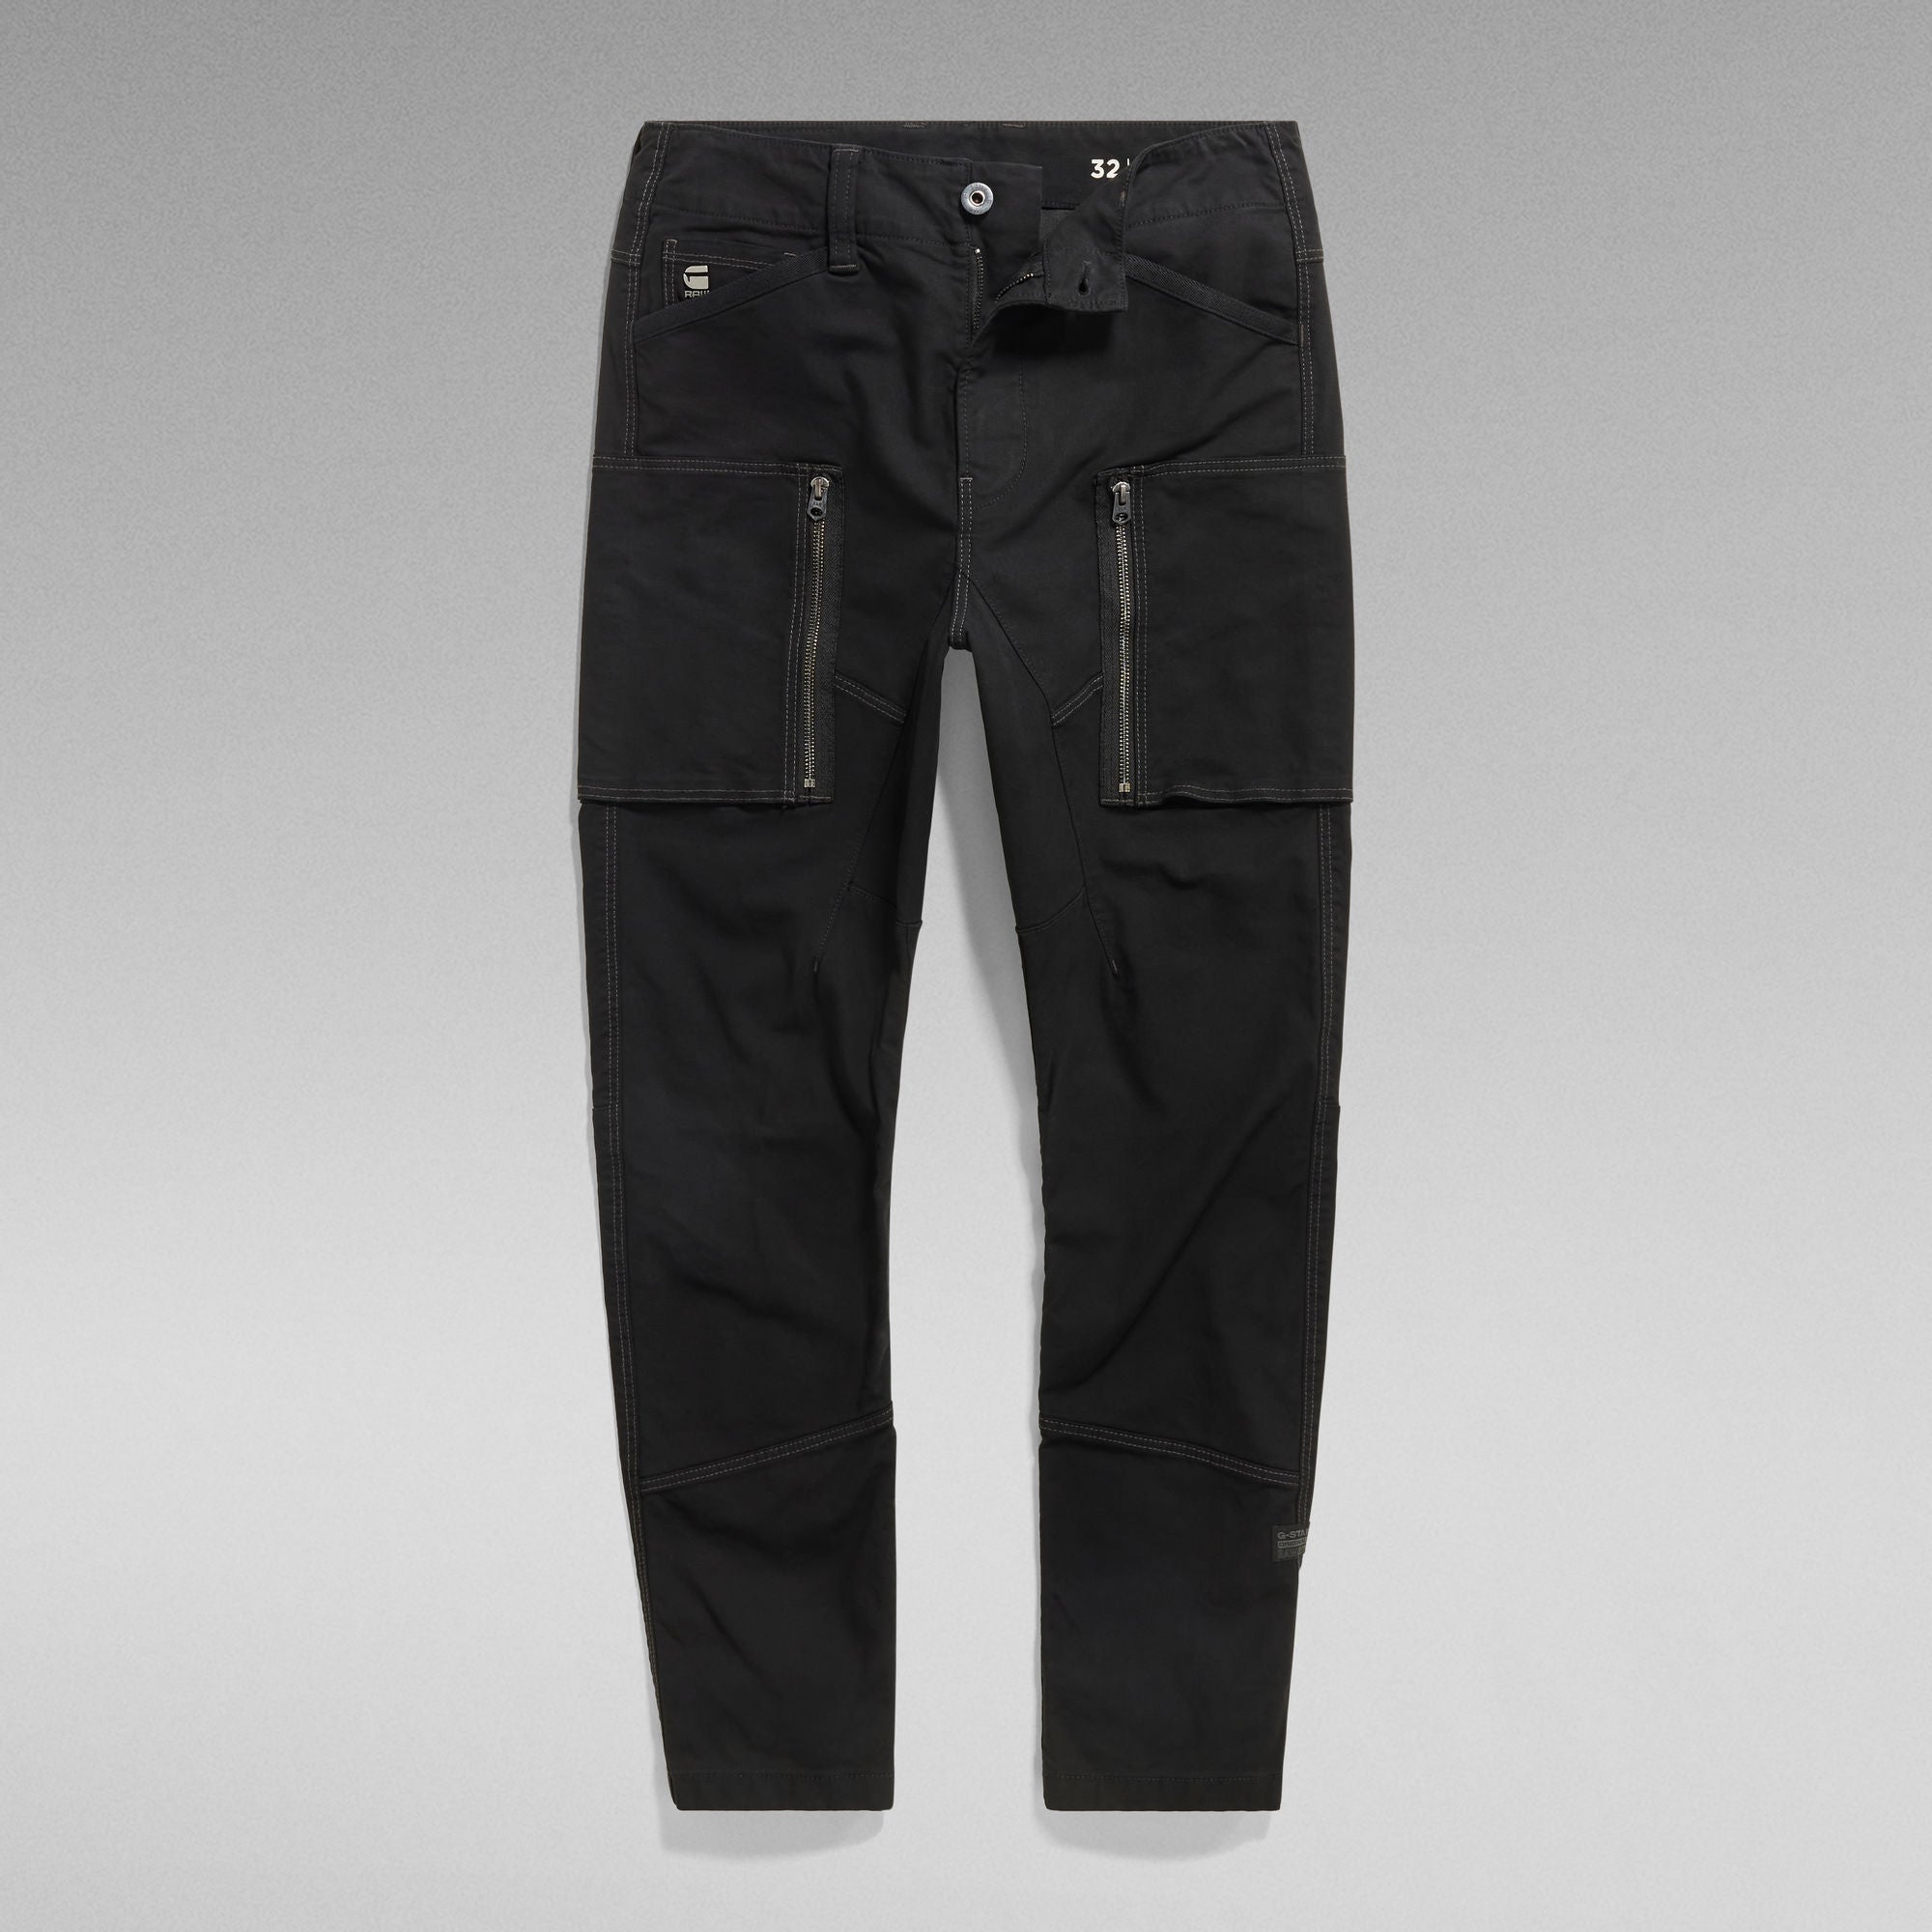 G-STAR Rovic Zip 3D Straight Tapered Pant 'Cloack' – Route66.co.nz